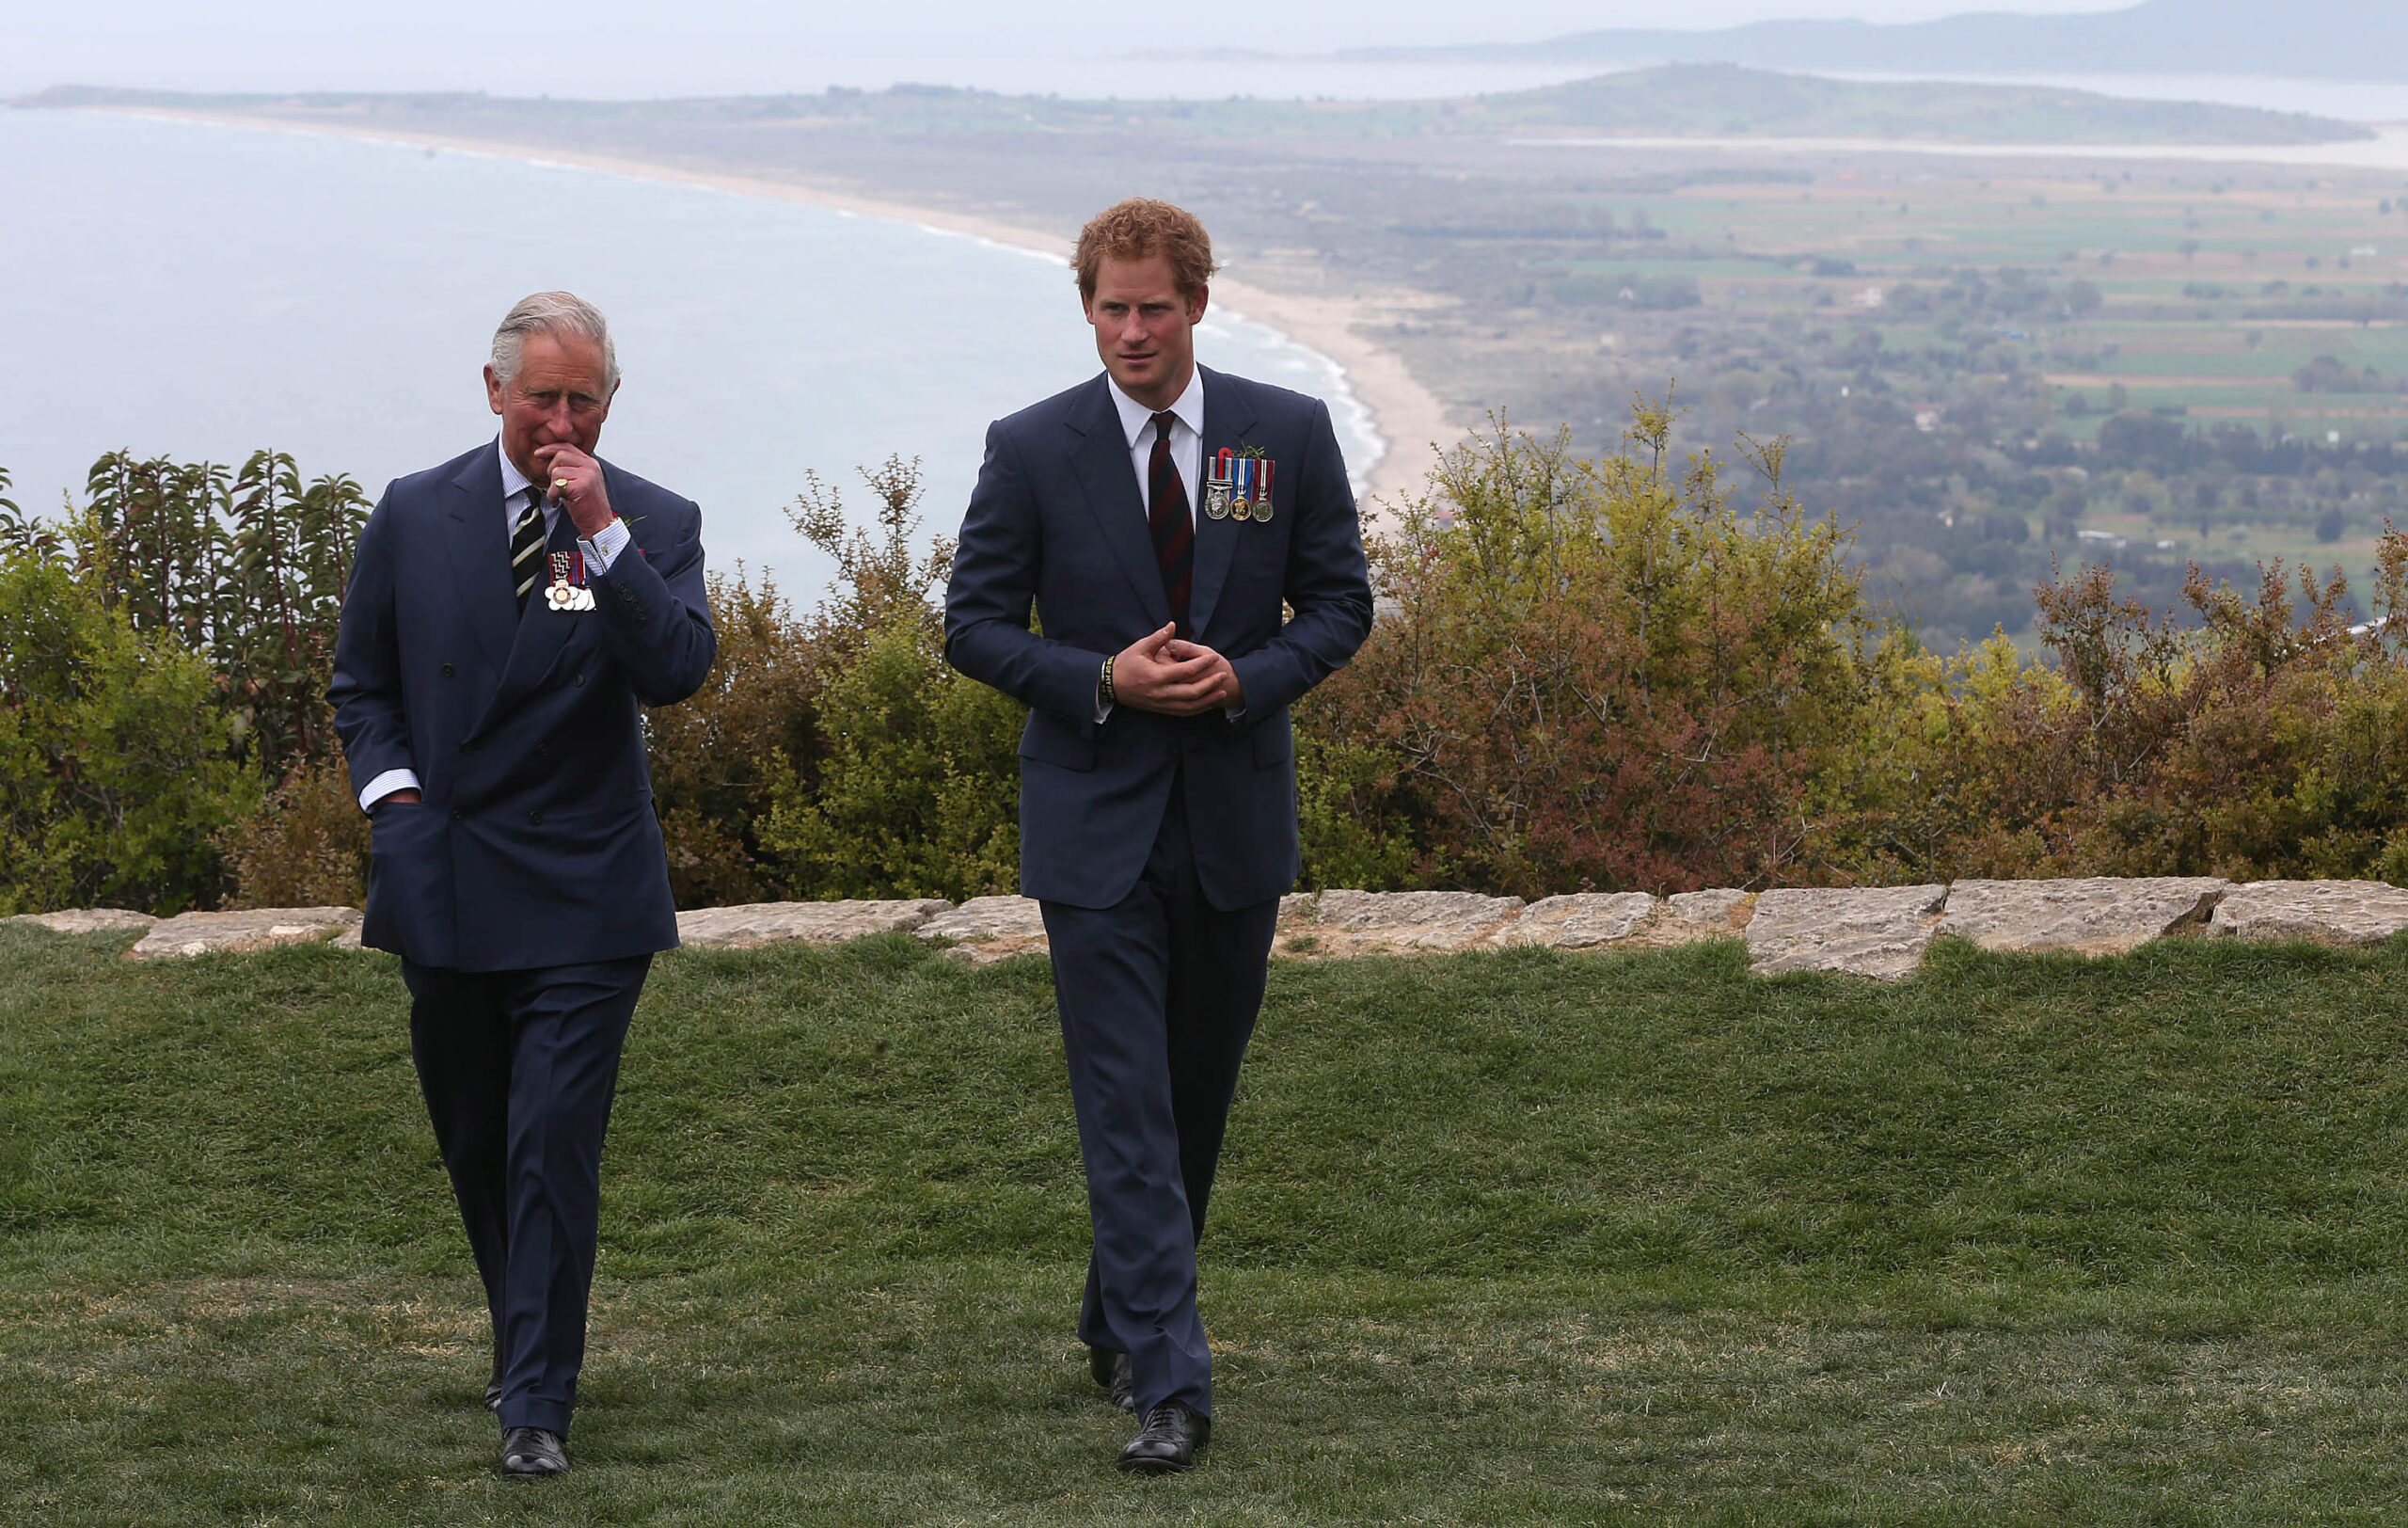 King Charles III and Prince Harry during the the commemorations for Gallipoli Campaign Centenary | Source: Getty Images